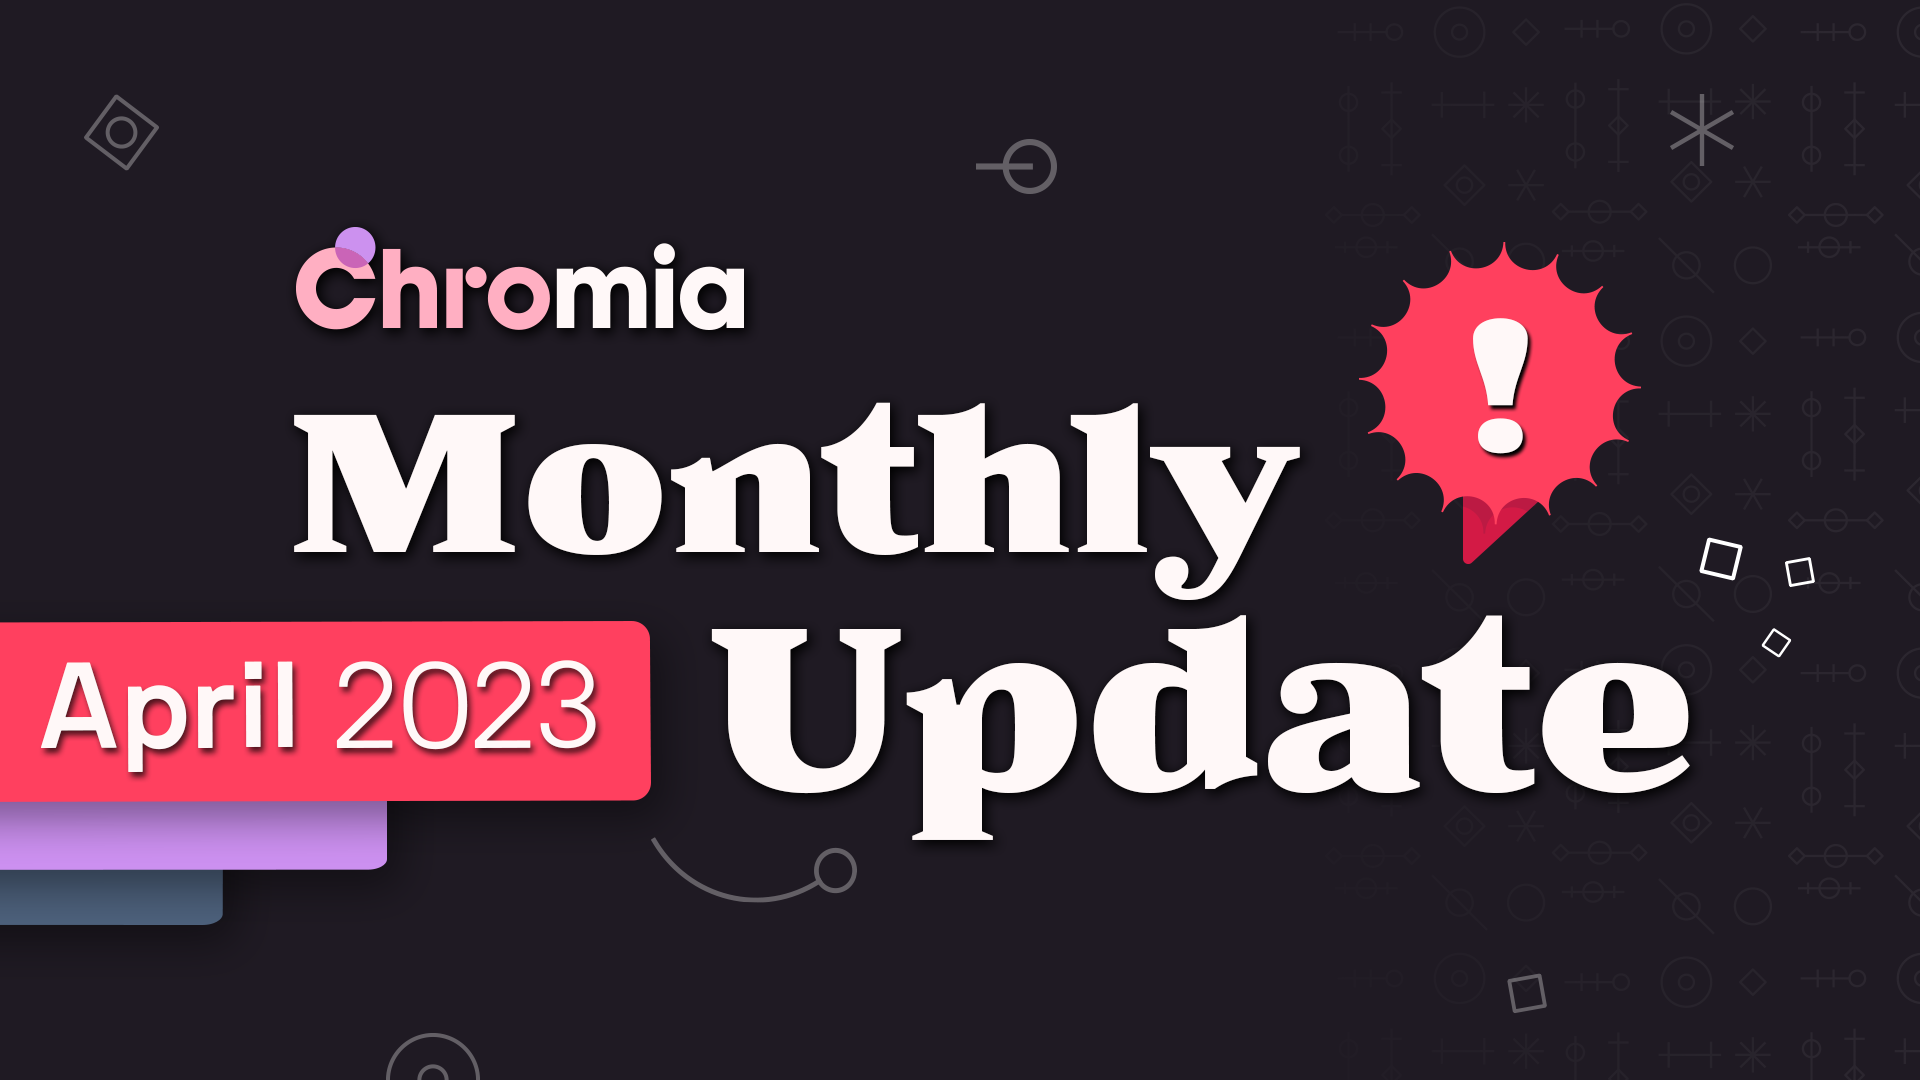 Chromia Monthly Update: April 2023